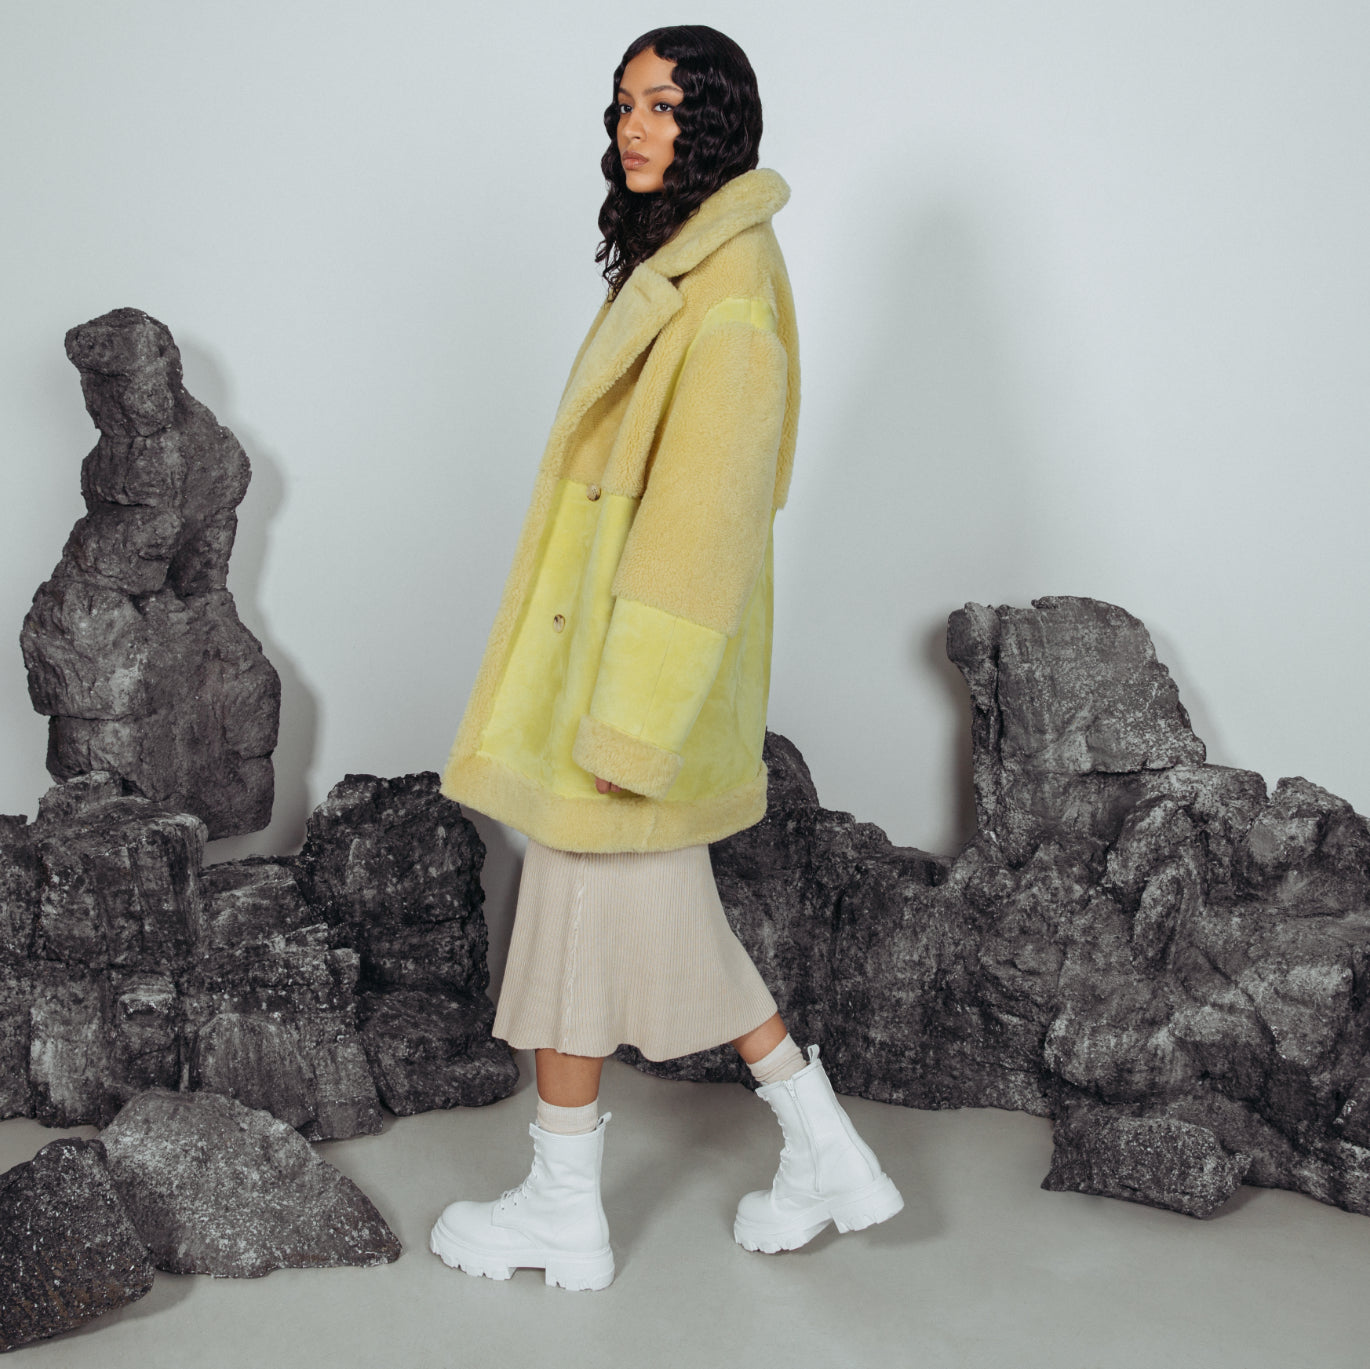 CANARY NAPPA CURLY. Shearling. Reversible. Oversized loose fitted style. Relaxed shoulder. Deep armhole and wide sleeves. Straight cut through torso. 33 in